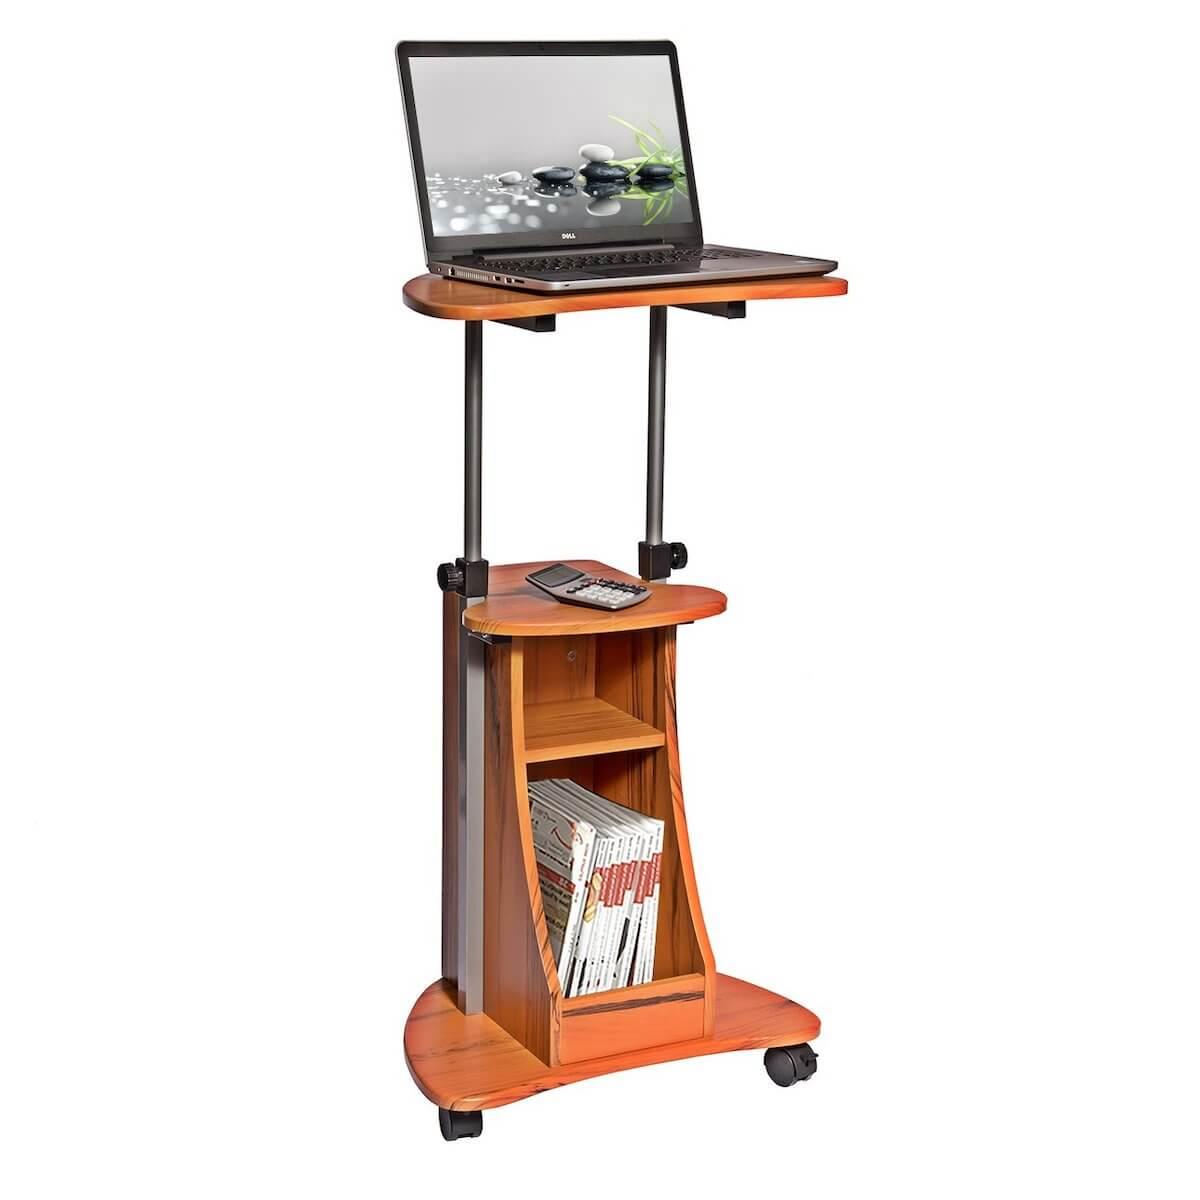 Techni Mobili Wood Grain Sit-to-Stand Rolling Adjustable Height Laptop Cart With Storage RTA-B002-WG01 with Computer #color_wood grain